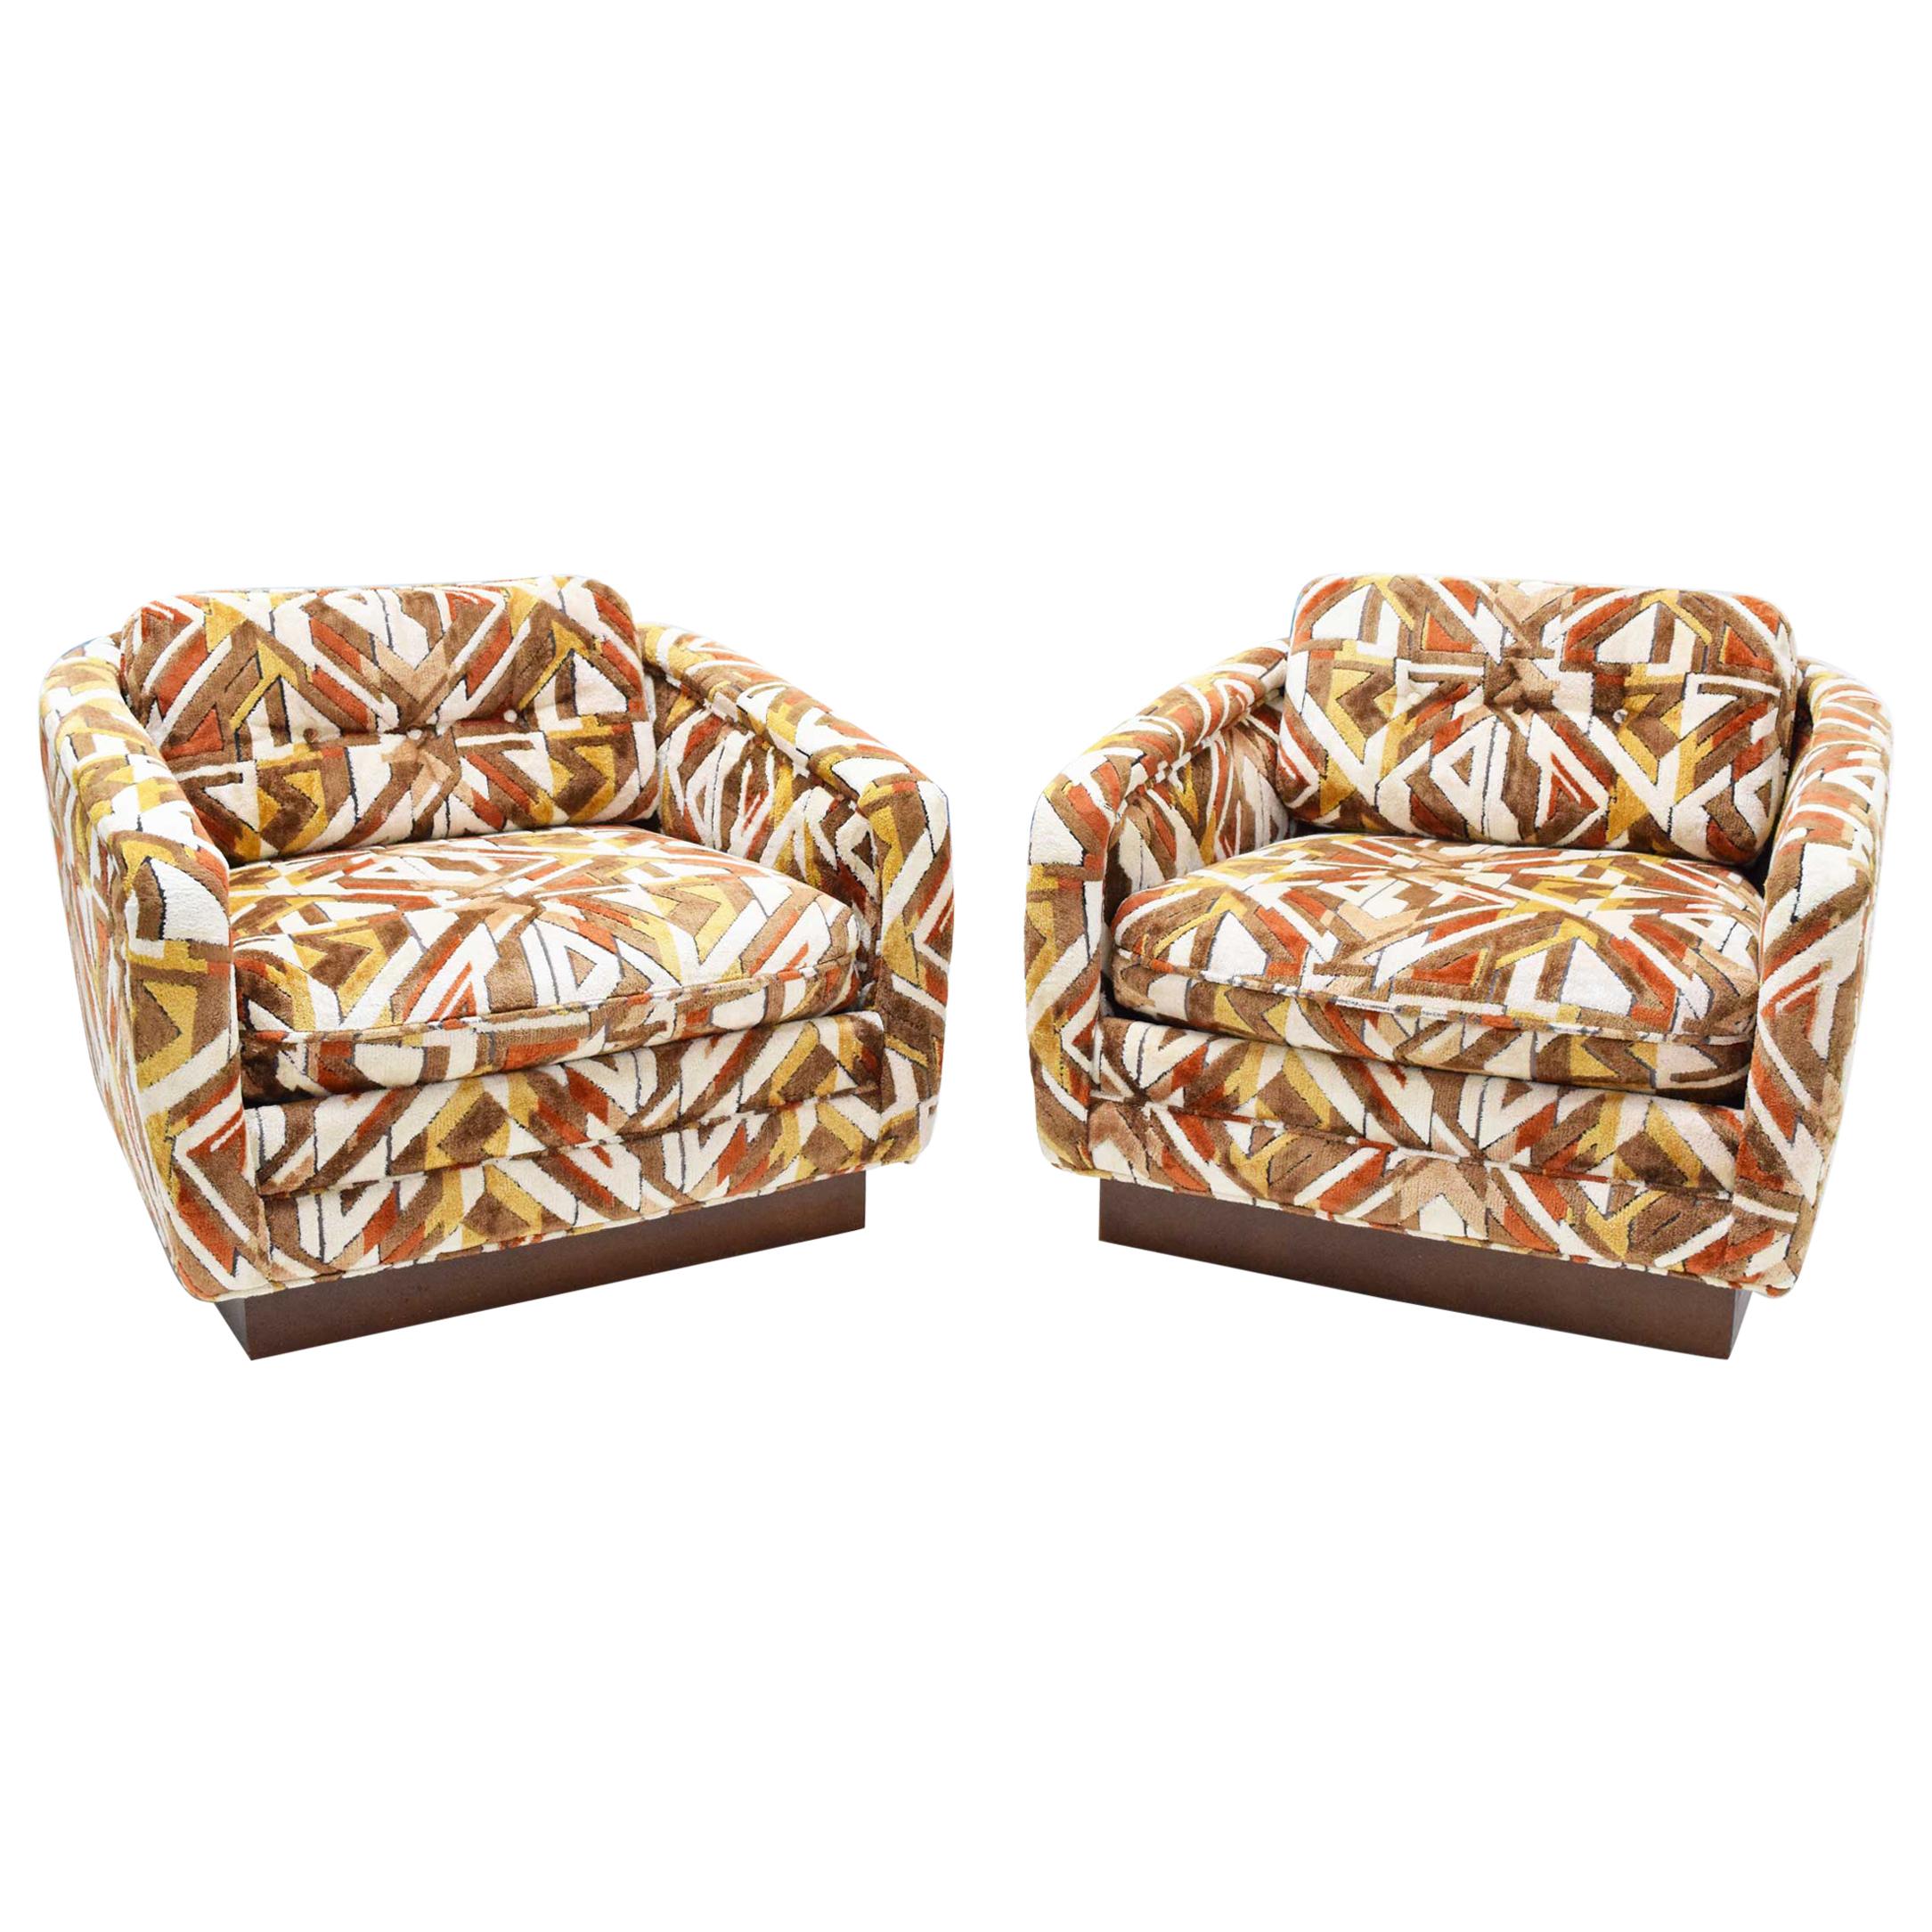 Swivel Lounge Chairs in Gorgeous Fabric by Silver-Craft Furniture Company